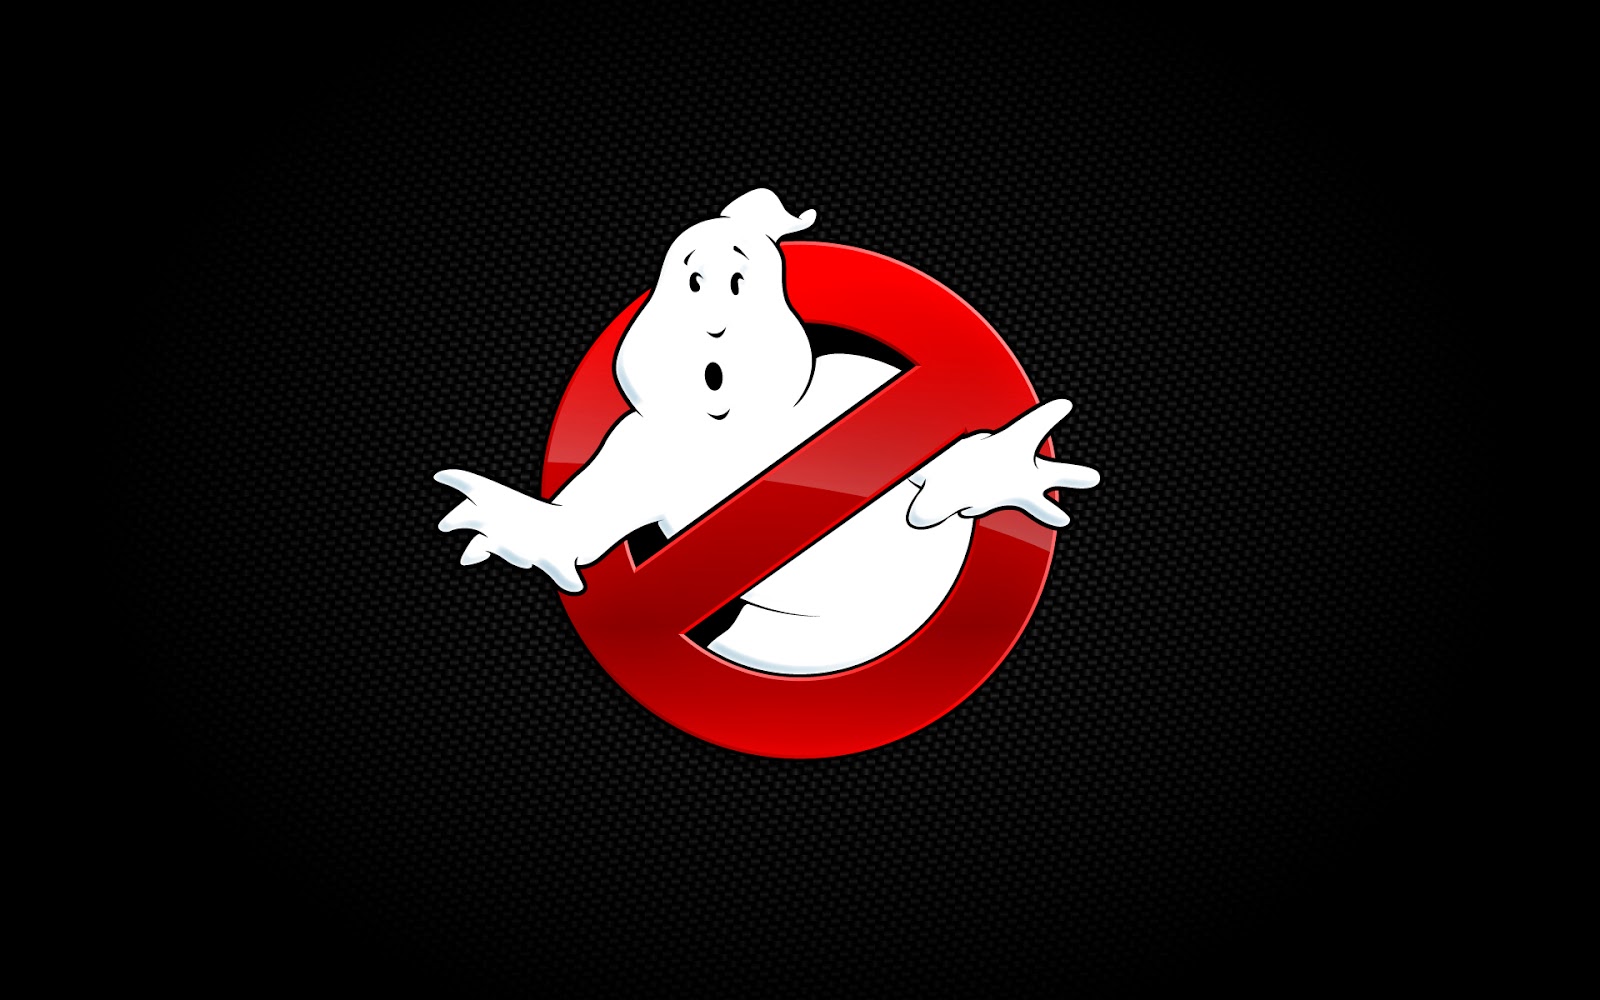 Female lead Ghostbusters reboot planned with Bridesmaids director. 